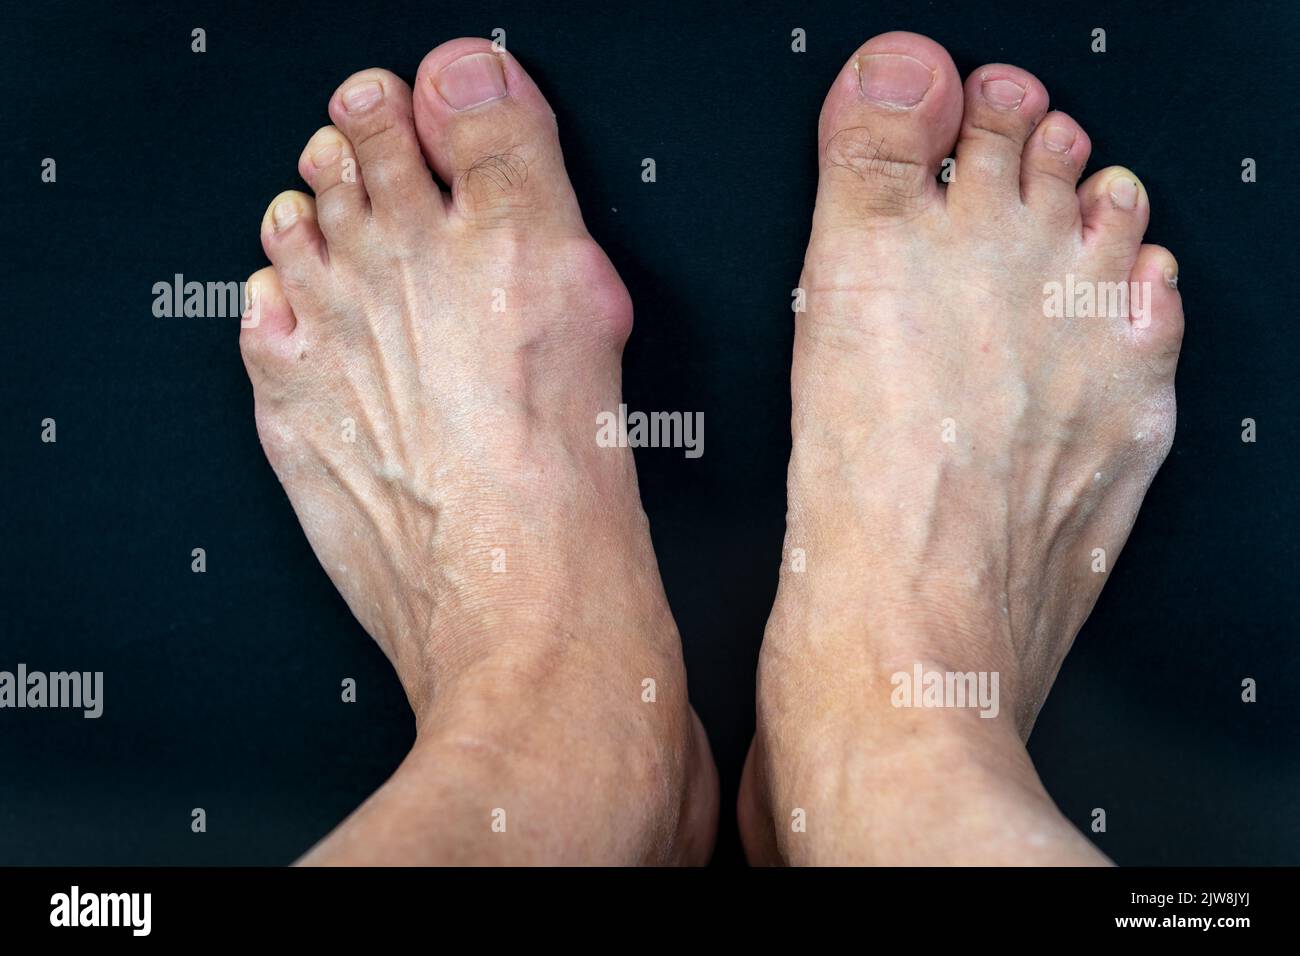 A foot with a gout bunion compared with a normal one isolated in black background. Stock Photo